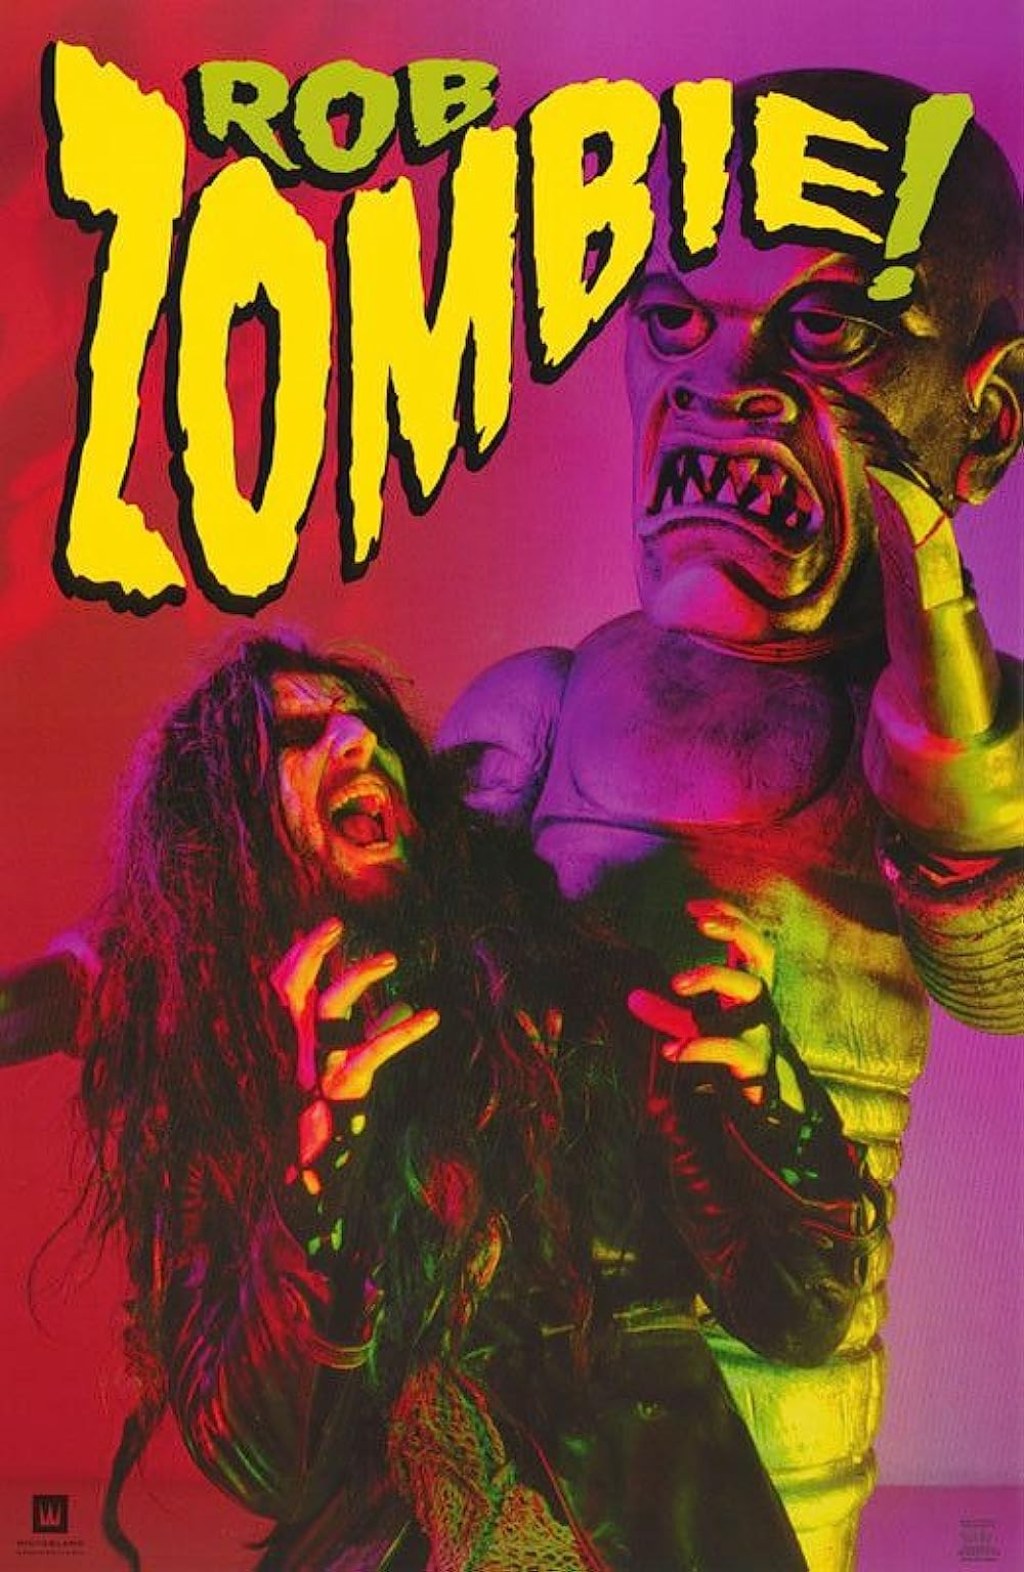 Picture of: Rob Zombie: Dragula (Music Video ) – Release info – IMDb